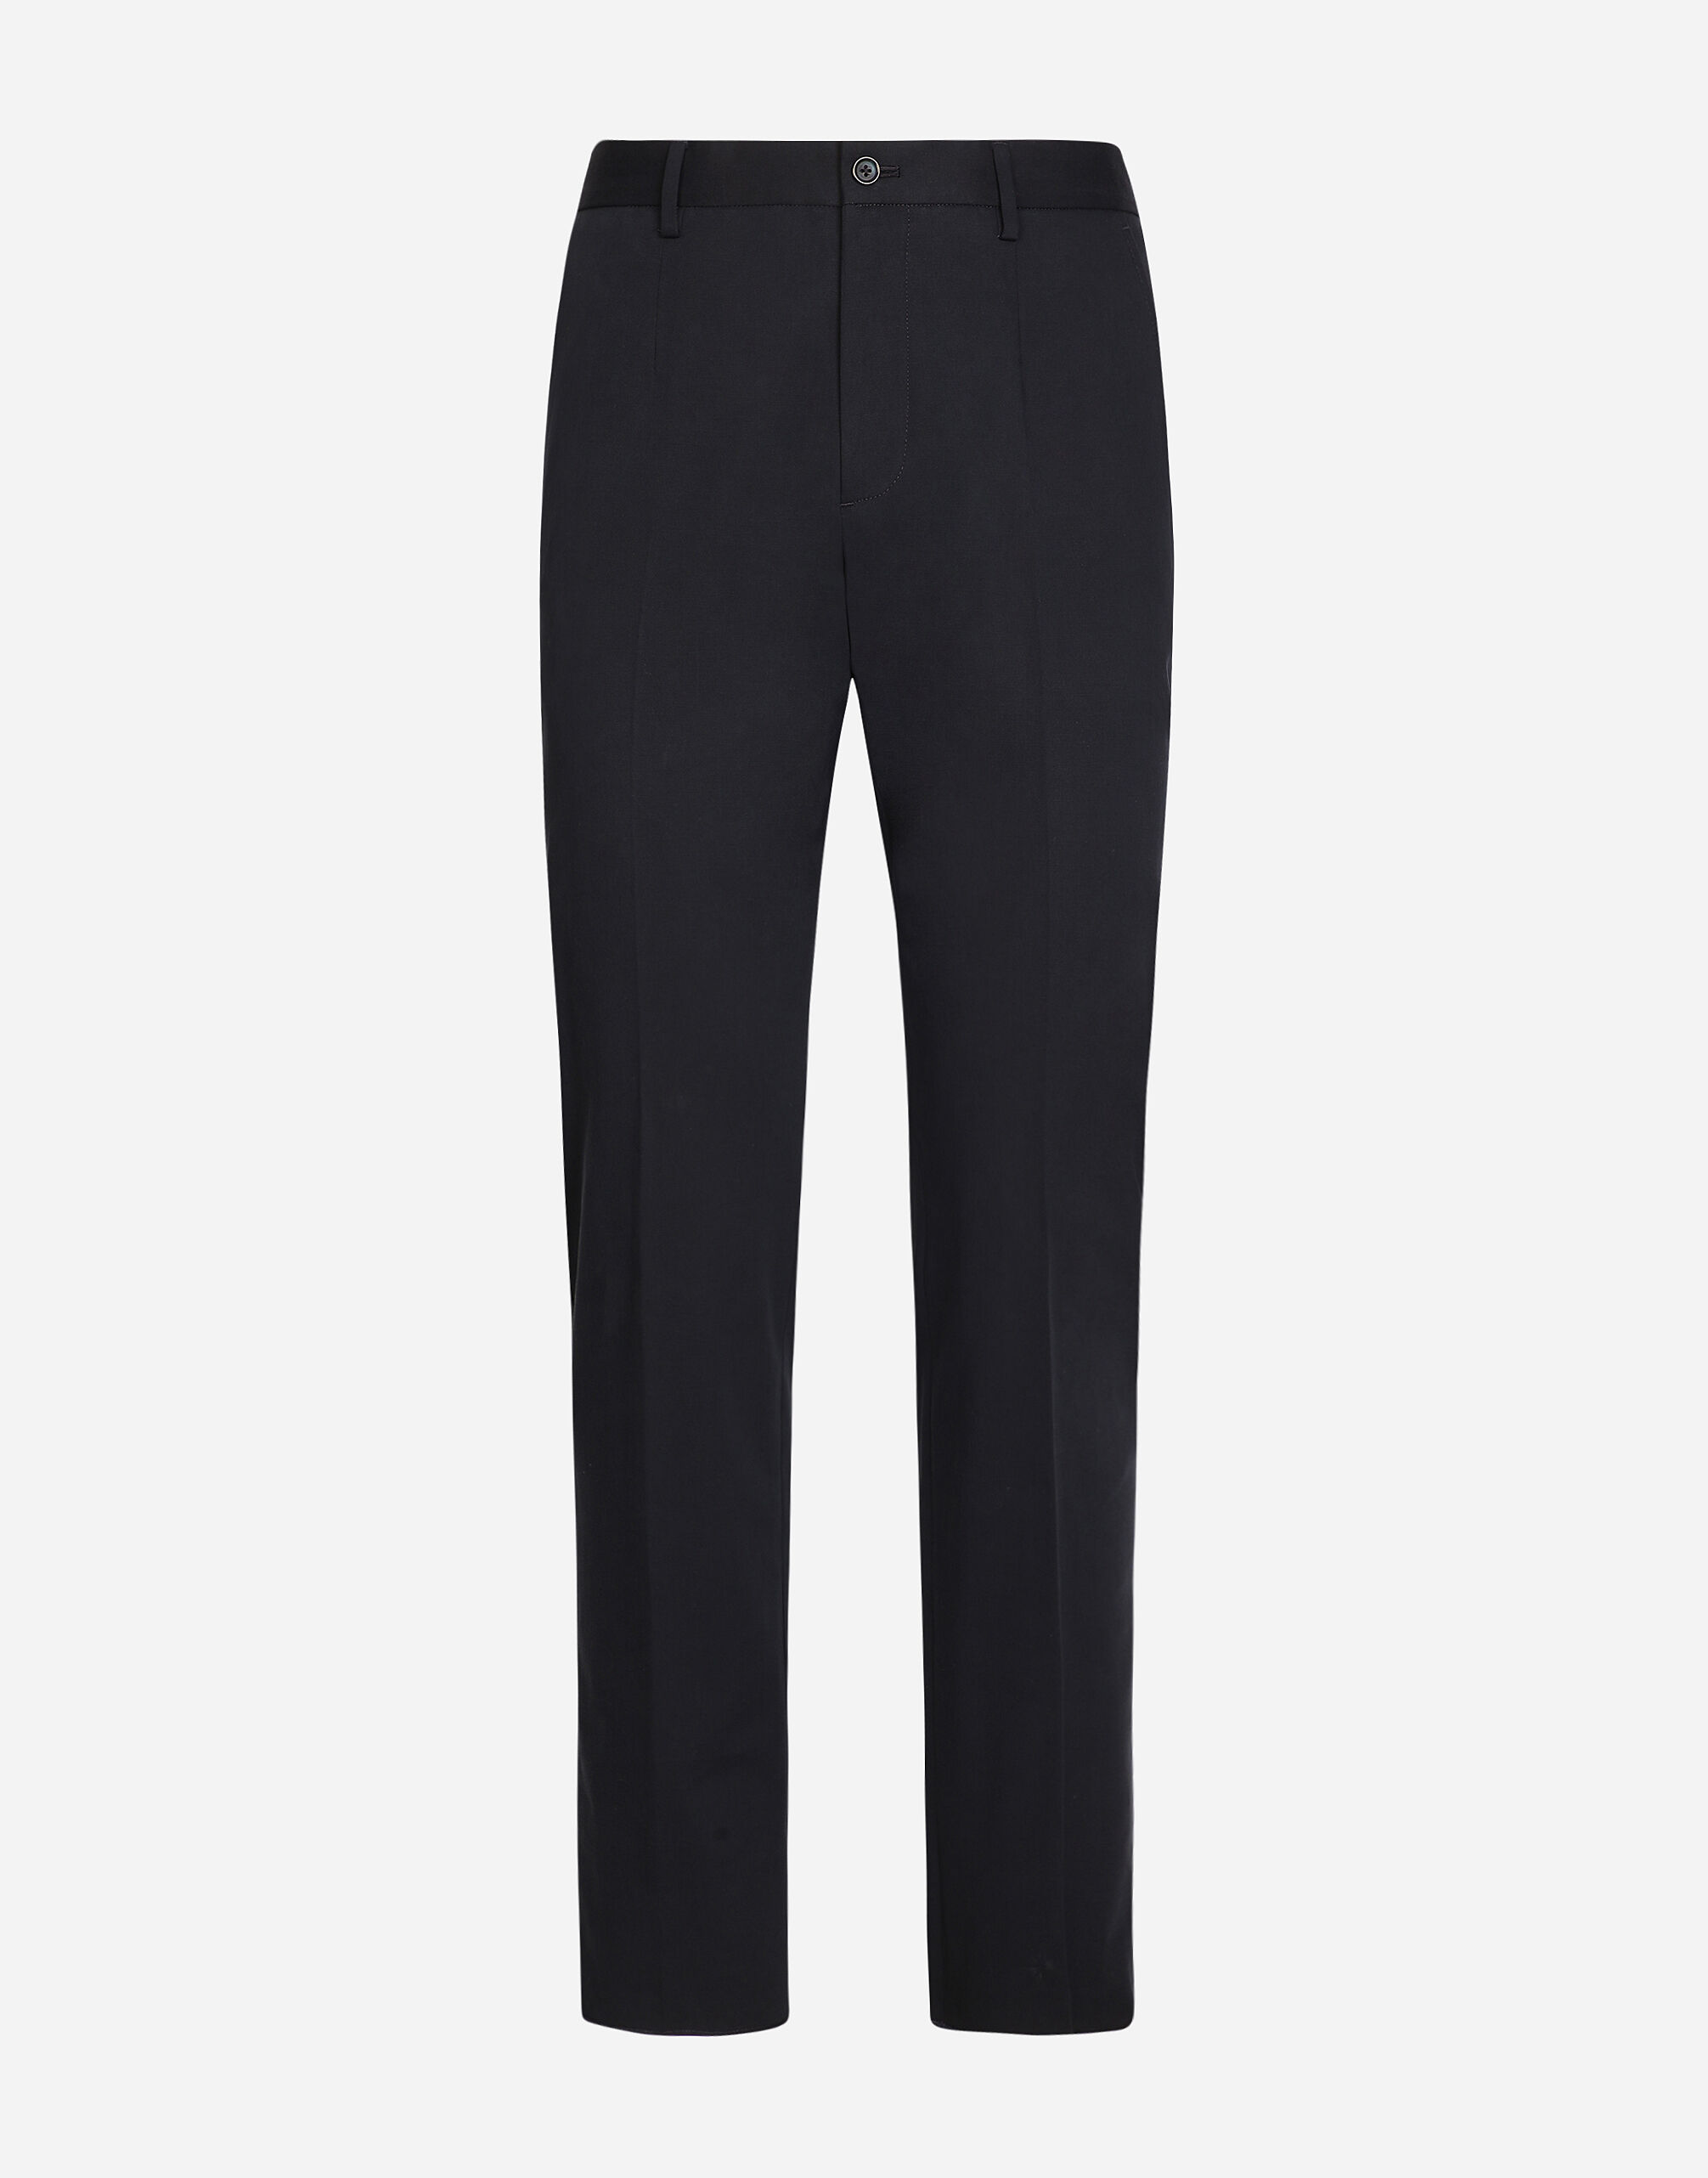 Regular Fit Cotton twill pull-on trousers - Black - Men | H&M IN